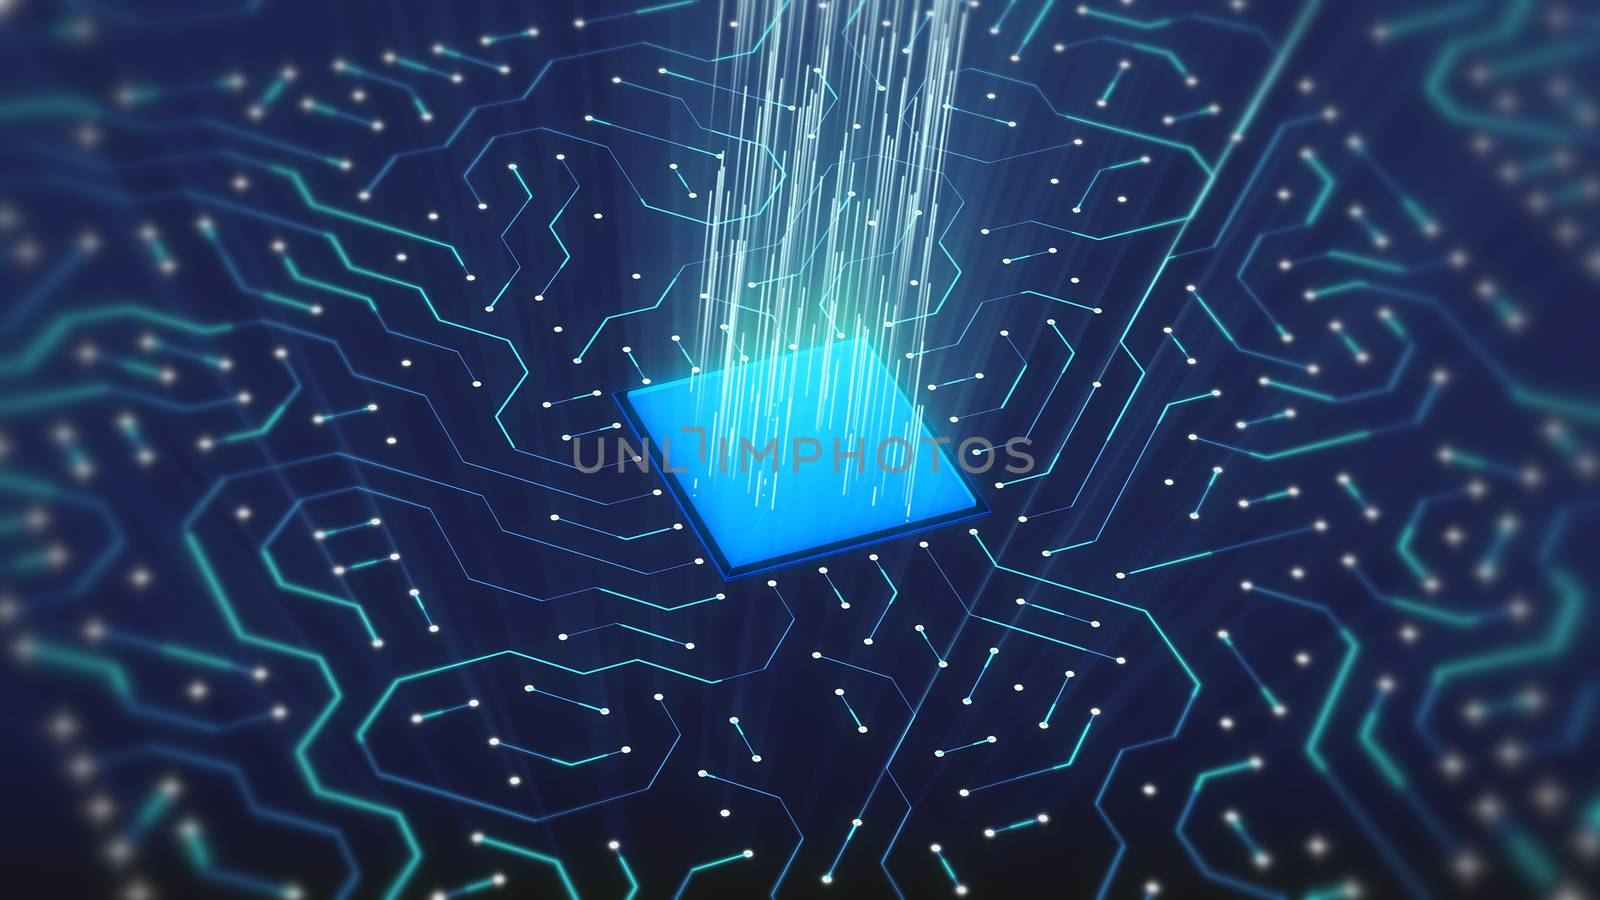 Striking 3d illustration of many lines of square blue microchips with pulsing white rays. They are put aslant on the board with crisscross electronic lines.